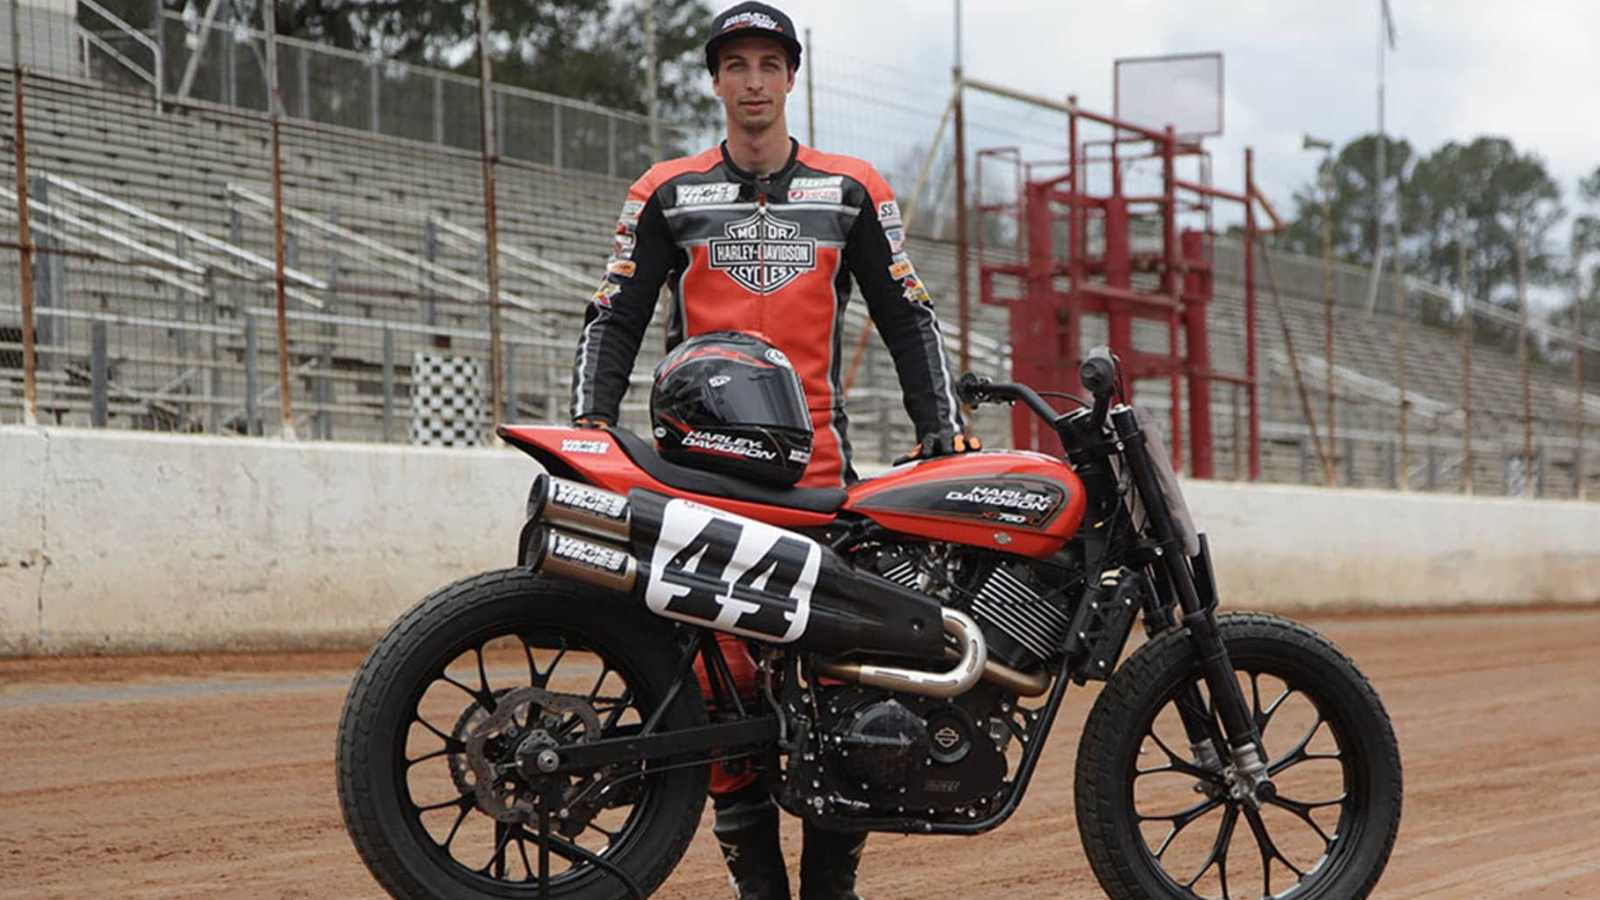 Daily Slideshow H D Factory Flat Track Team Doesn T Like Losing Hdforums